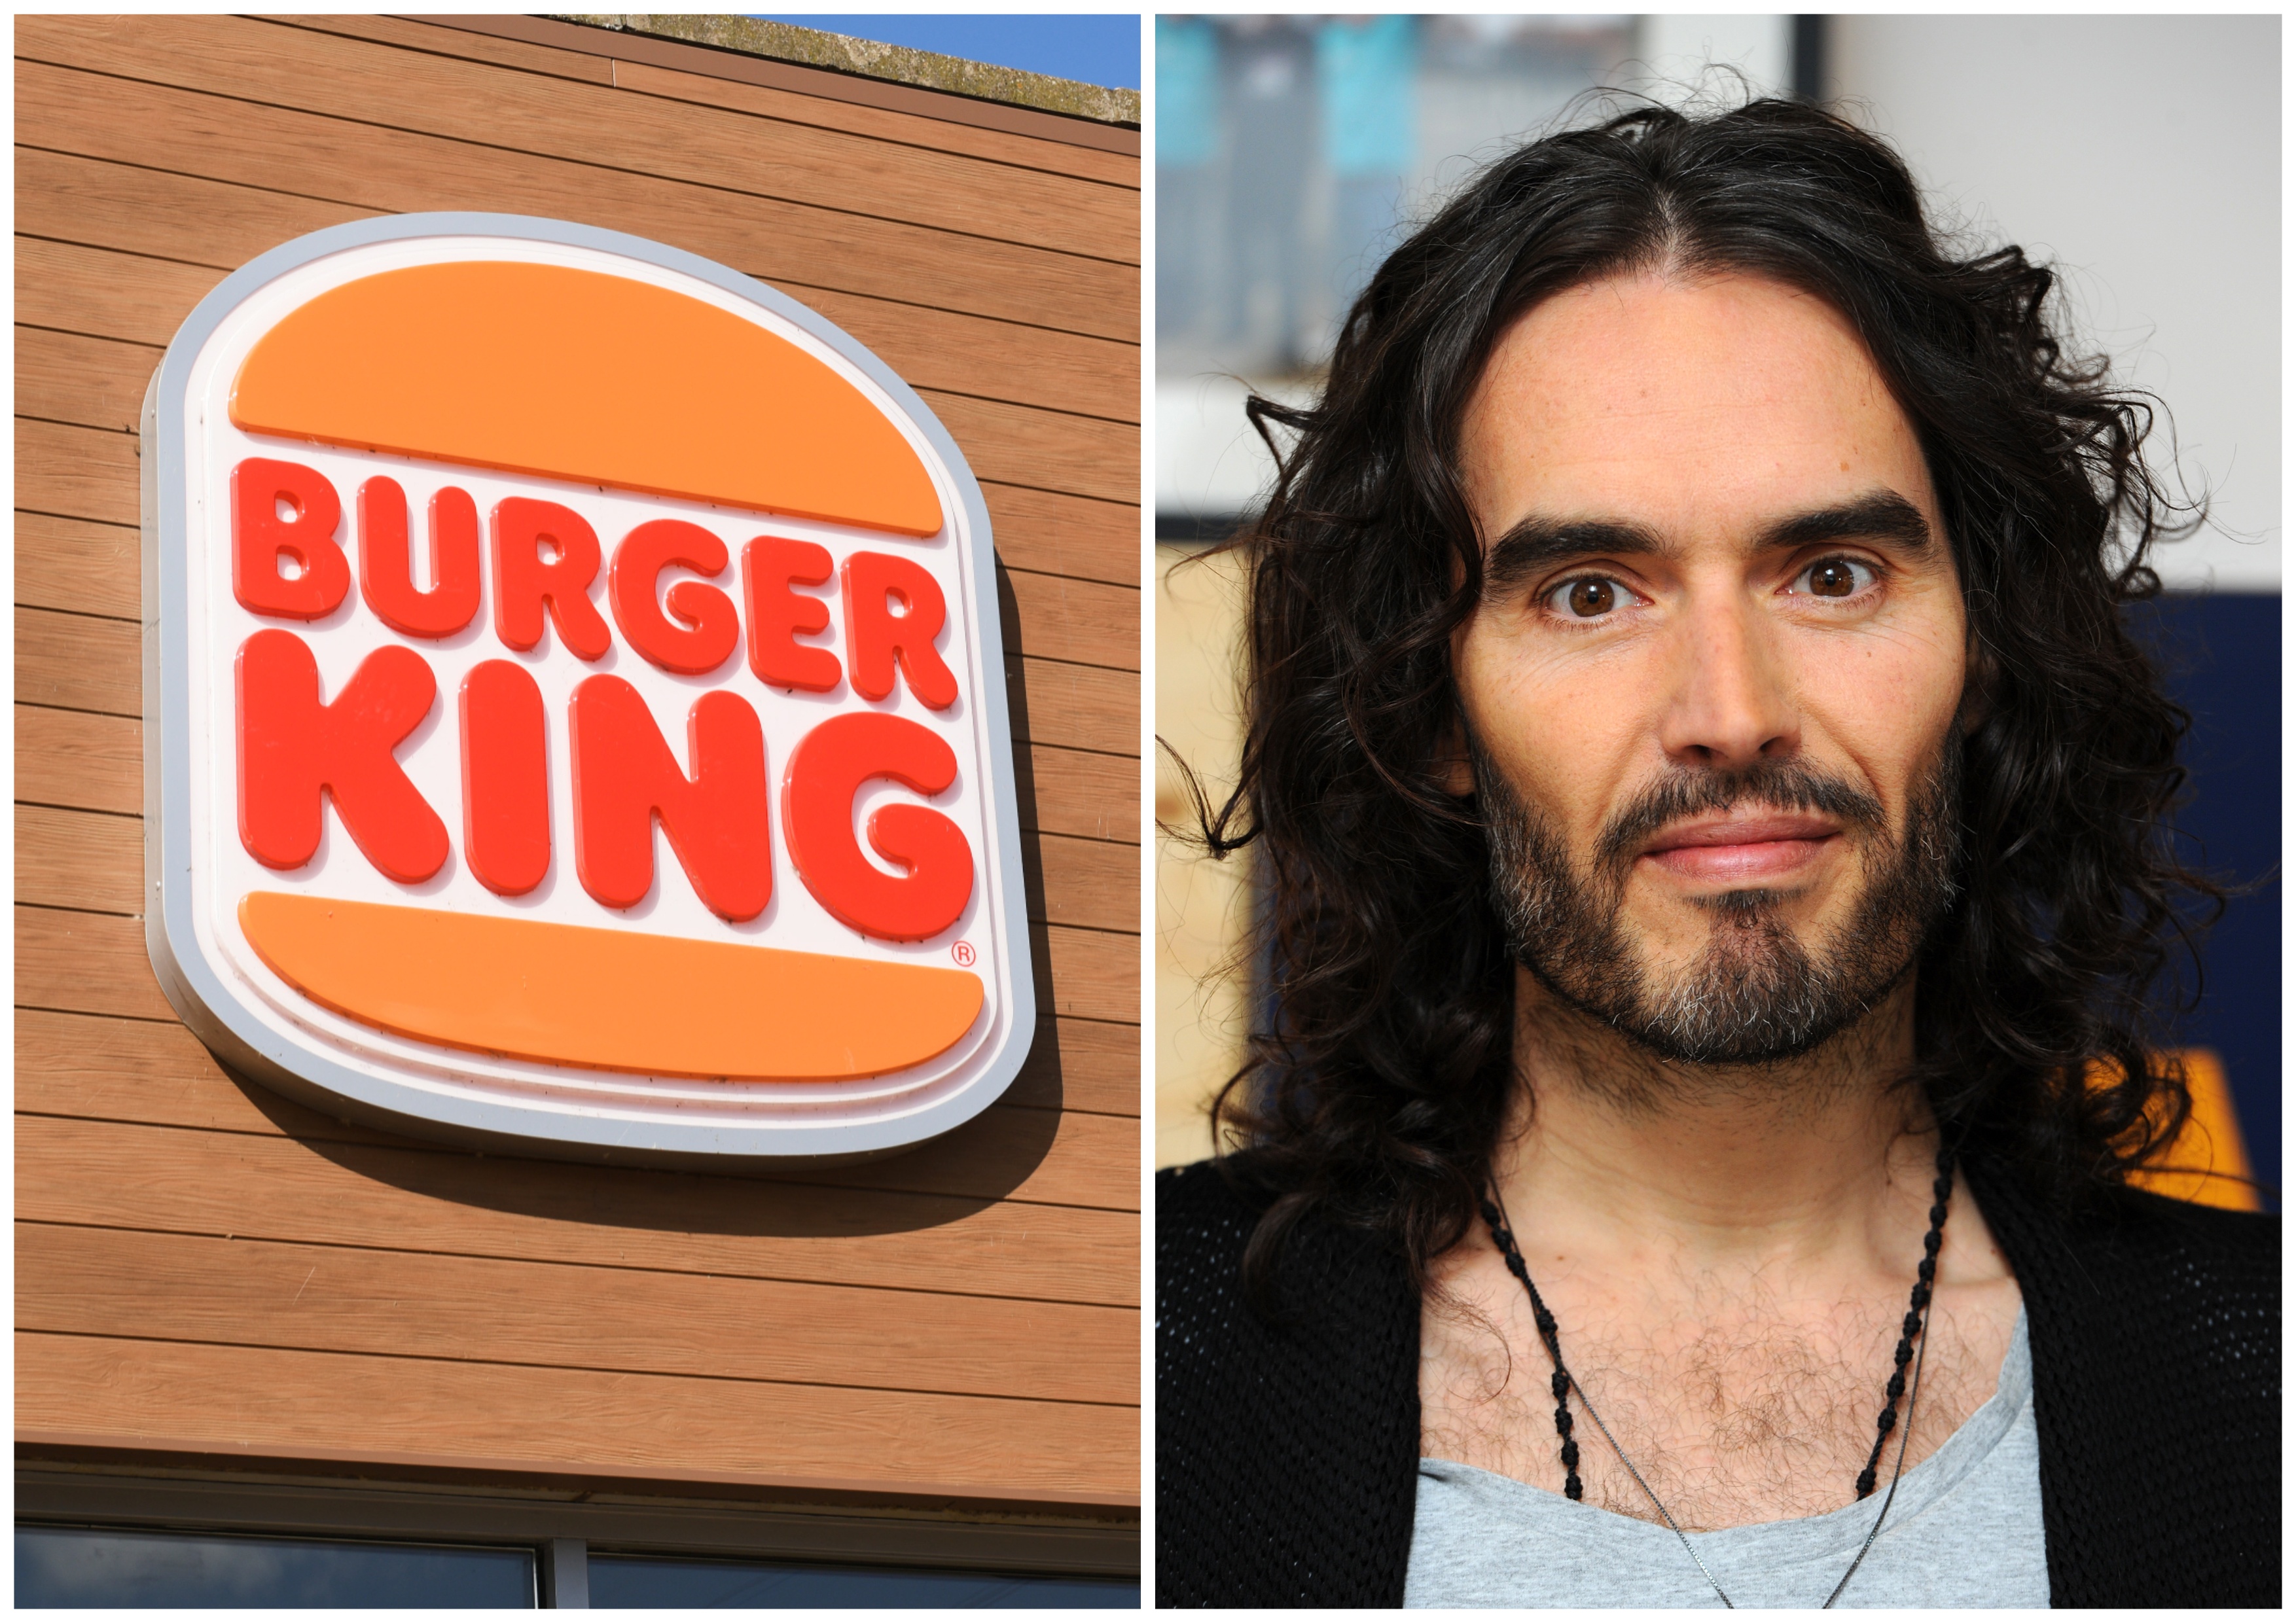 Burger King Called 'Woke' After Russell Brand Advert Move